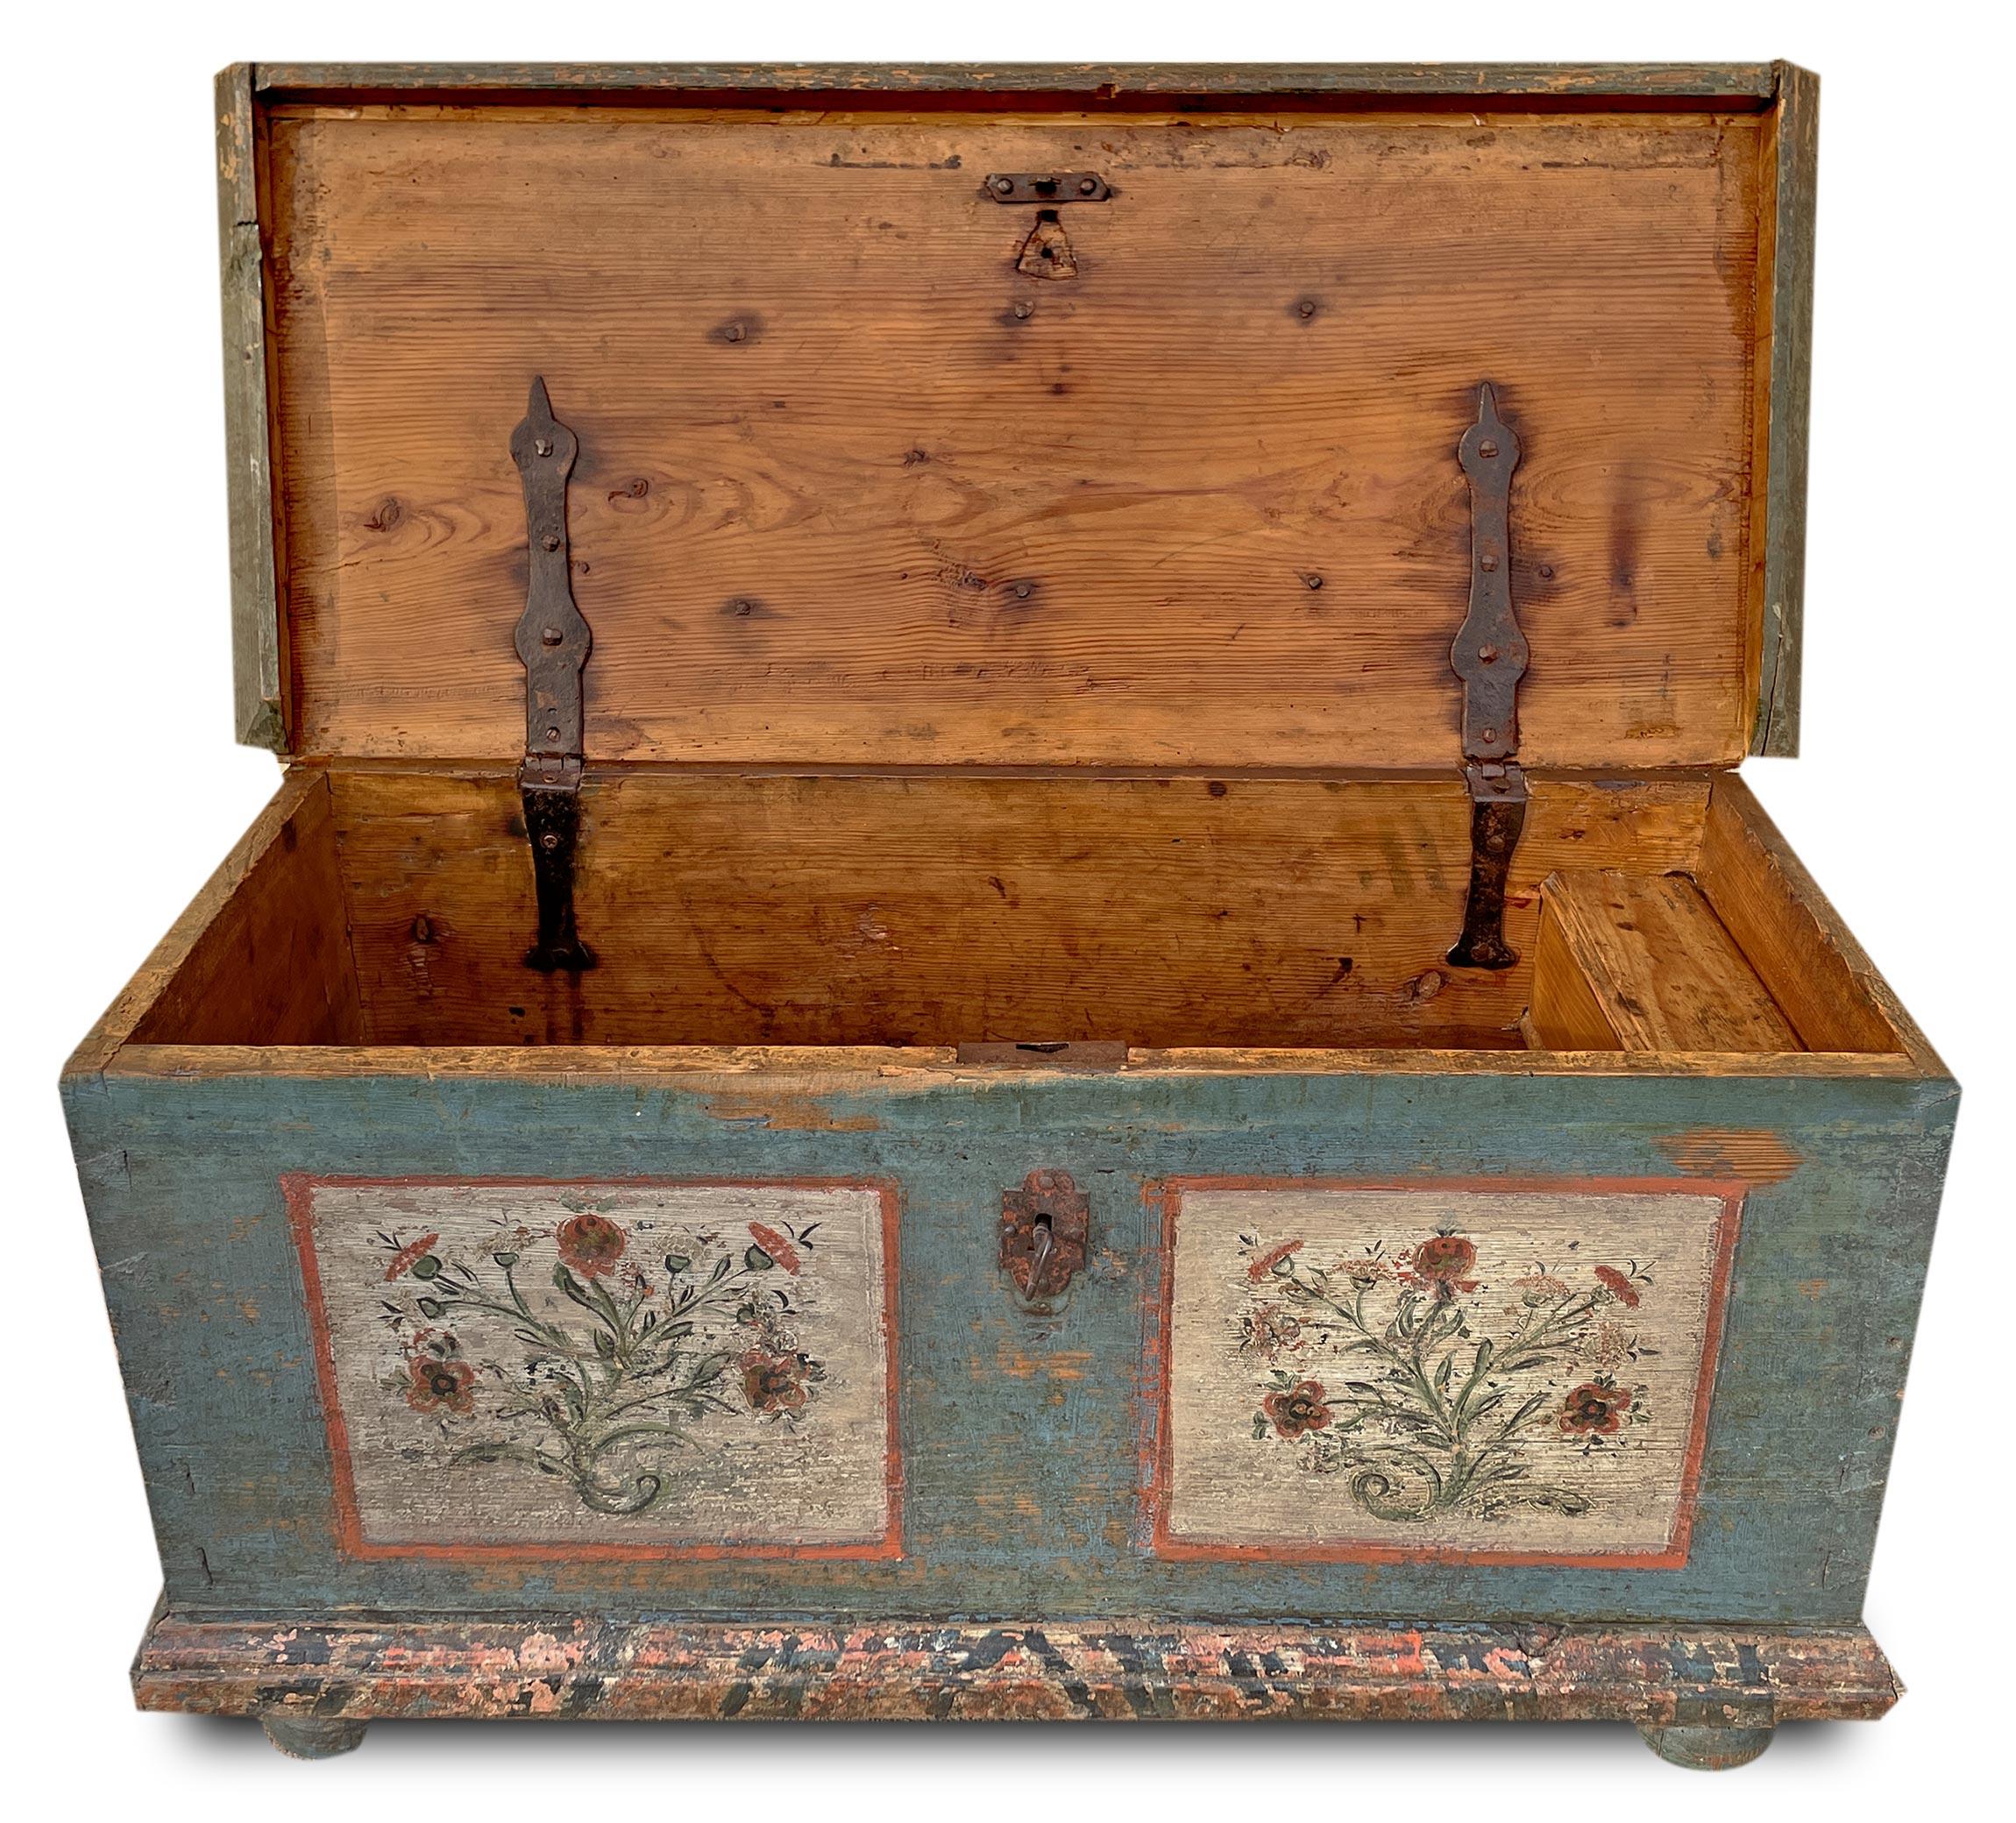 Tyrolean painted chest from the early 19th century

Measurements: H. 49m – L. 95cm – D. 41cm
Period: early 19th century
Origin: Tyrol
Essence: Fir

Painted chest, entirely made of fir wood and painted blue, rather rare due to its small size.
On the